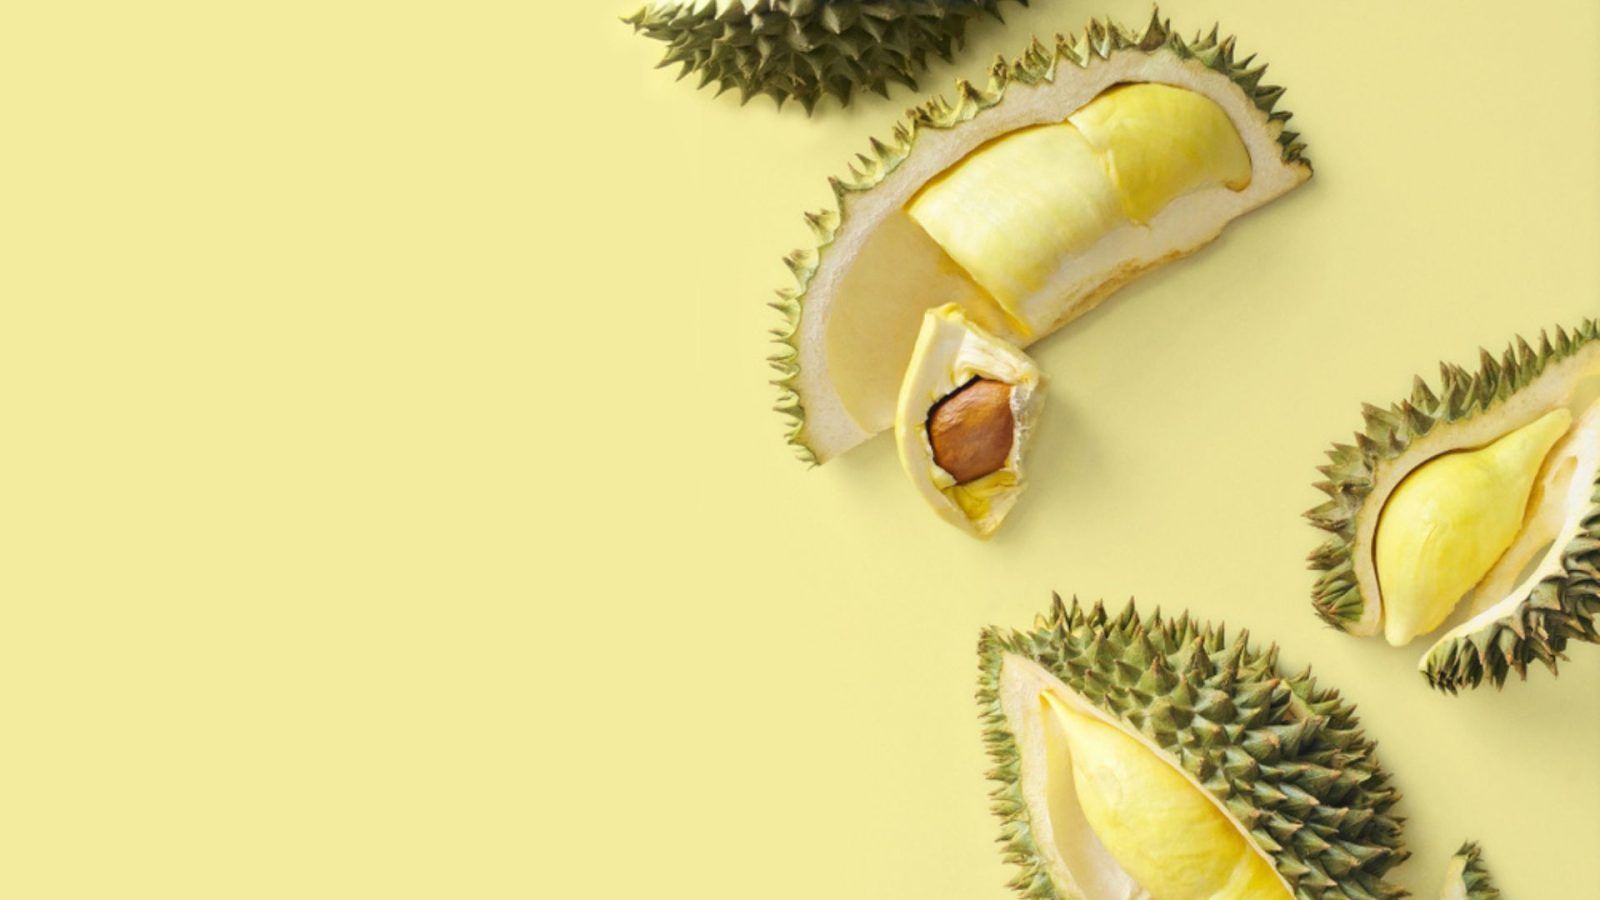 All you need to know about the intensely smelly durian fruit